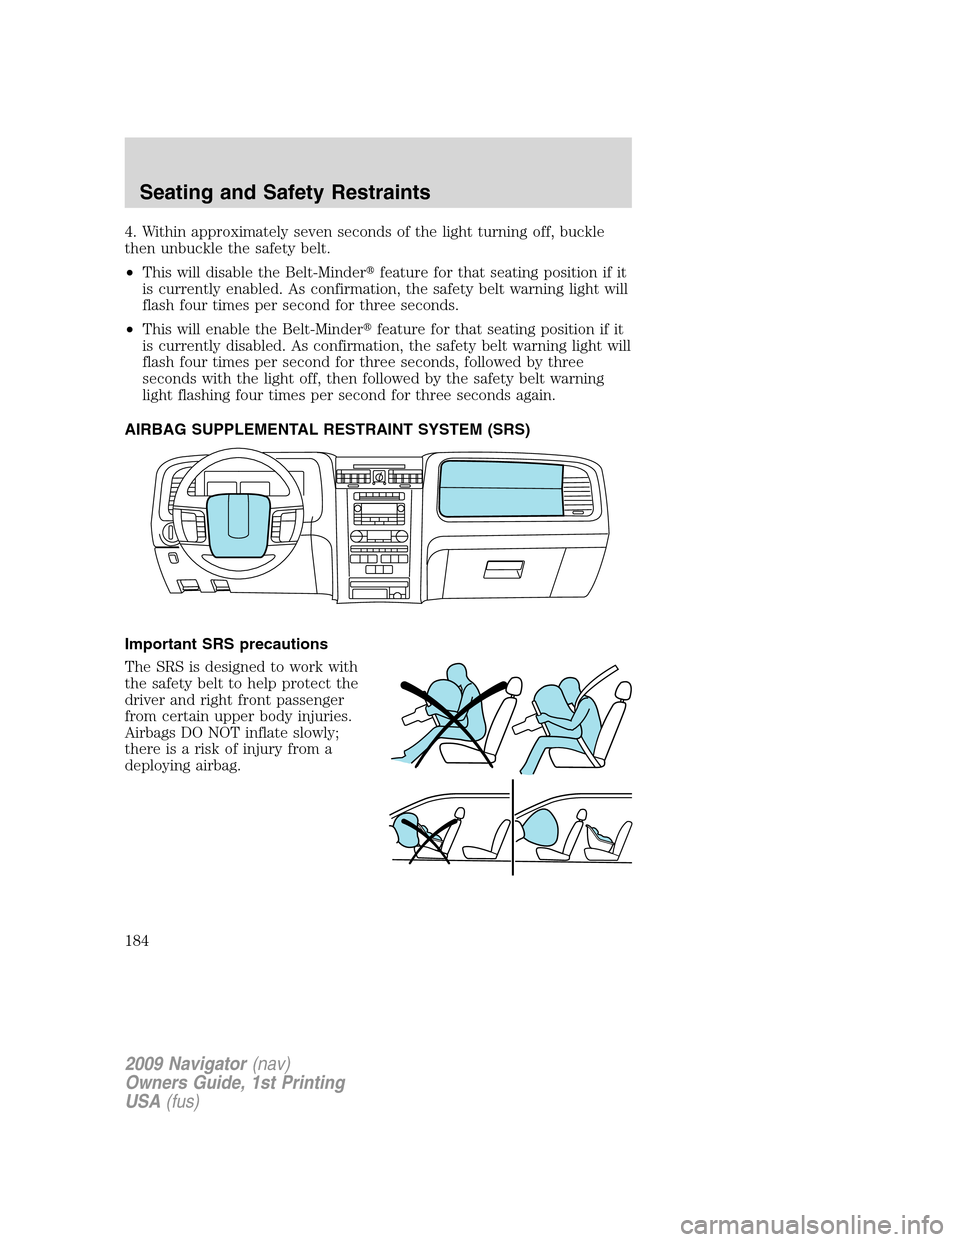 LINCOLN NAVIGATOR 2009  Owners Manual 4. Within approximately seven seconds of the light turning off, buckle
then unbuckle the safety belt.
•This will disable the Belt-Minderfeature for that seating position if it
is currently enabled.